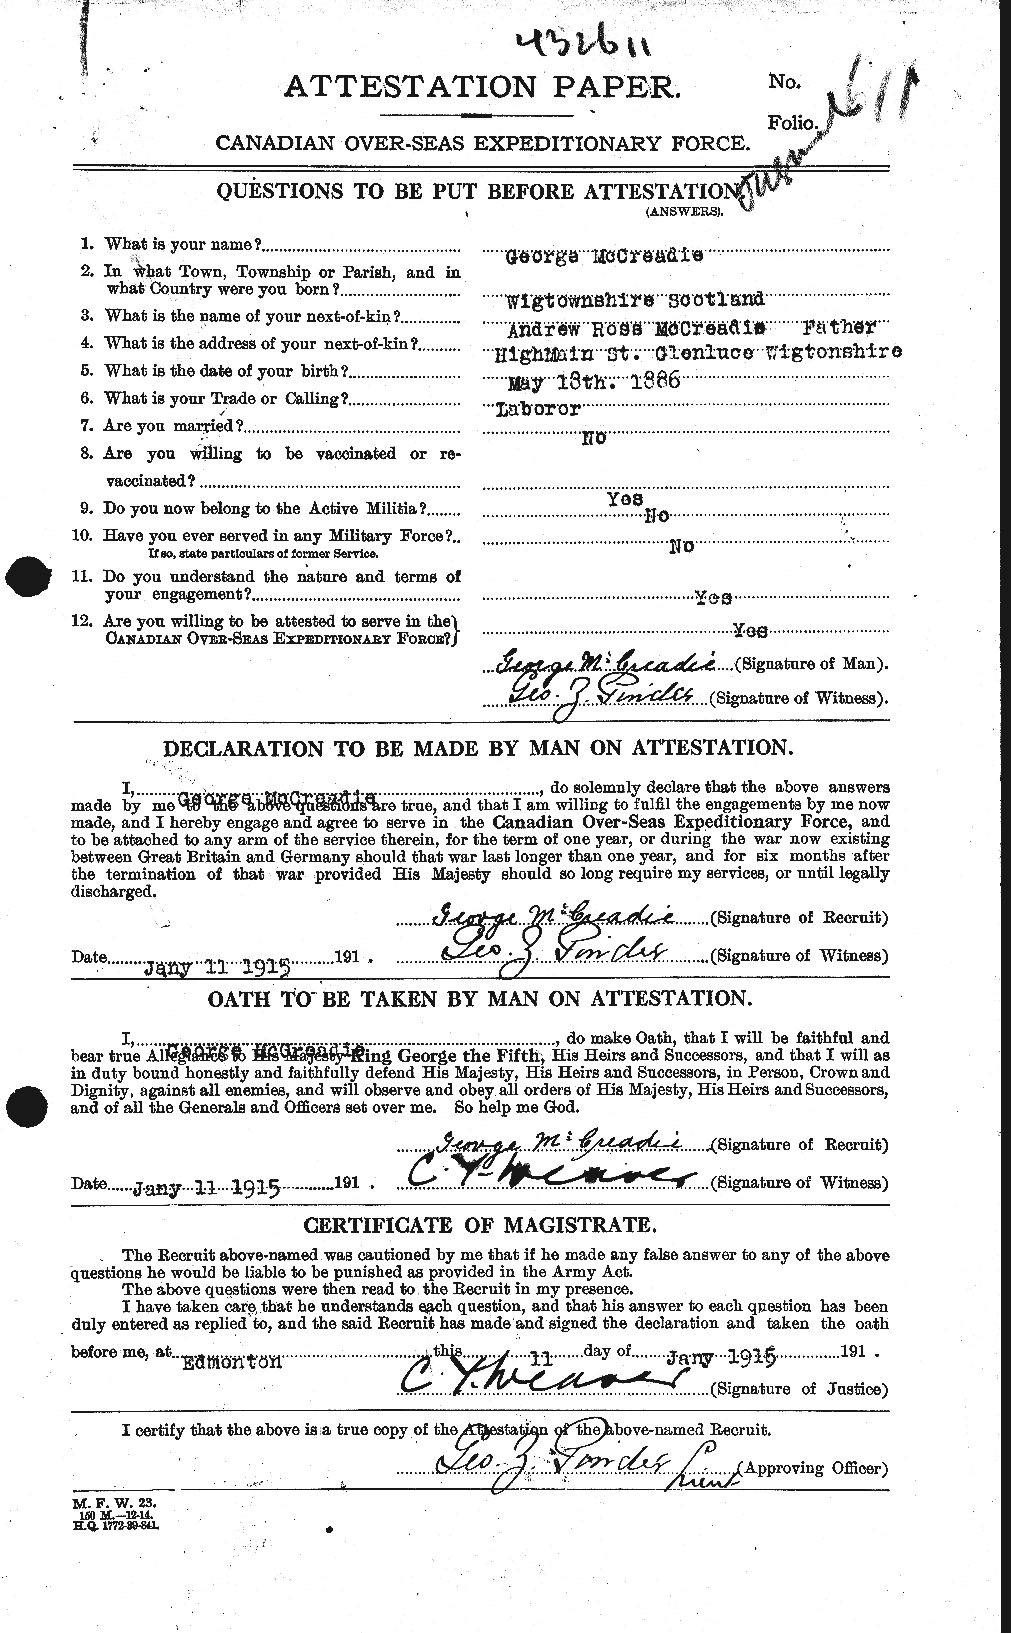 Personnel Records of the First World War - CEF 136055a